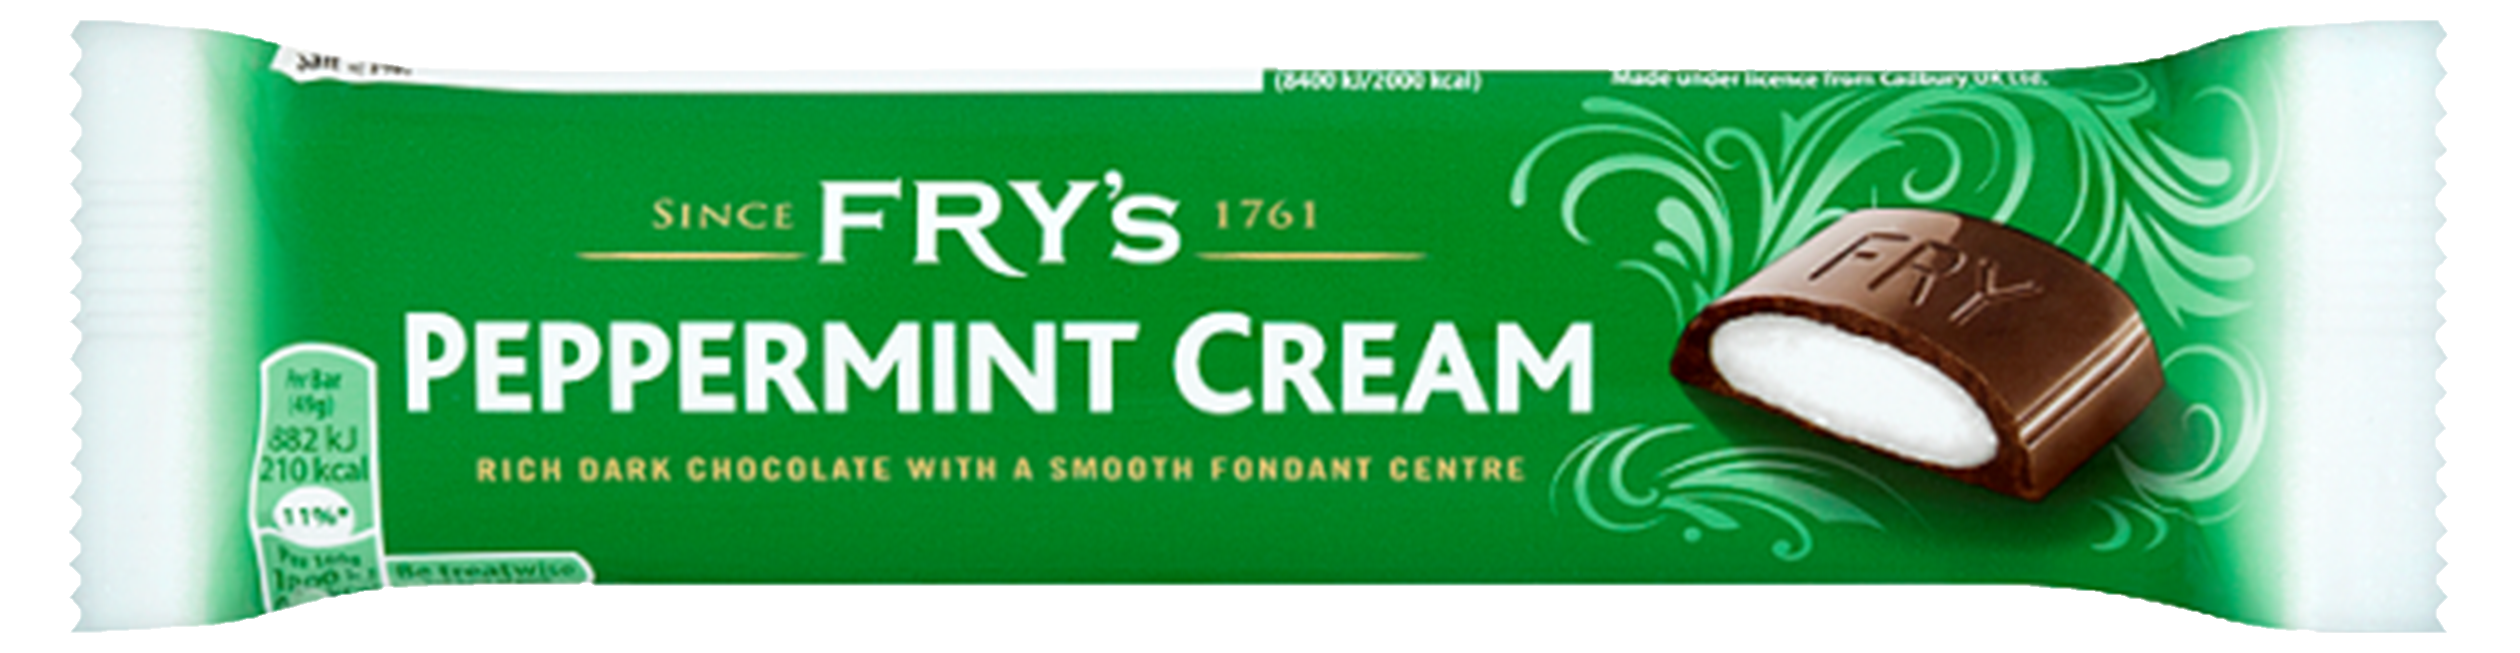 Frys Peppermint Cream - Importing your favorite British food to New Zealand frys pharmacy verrado